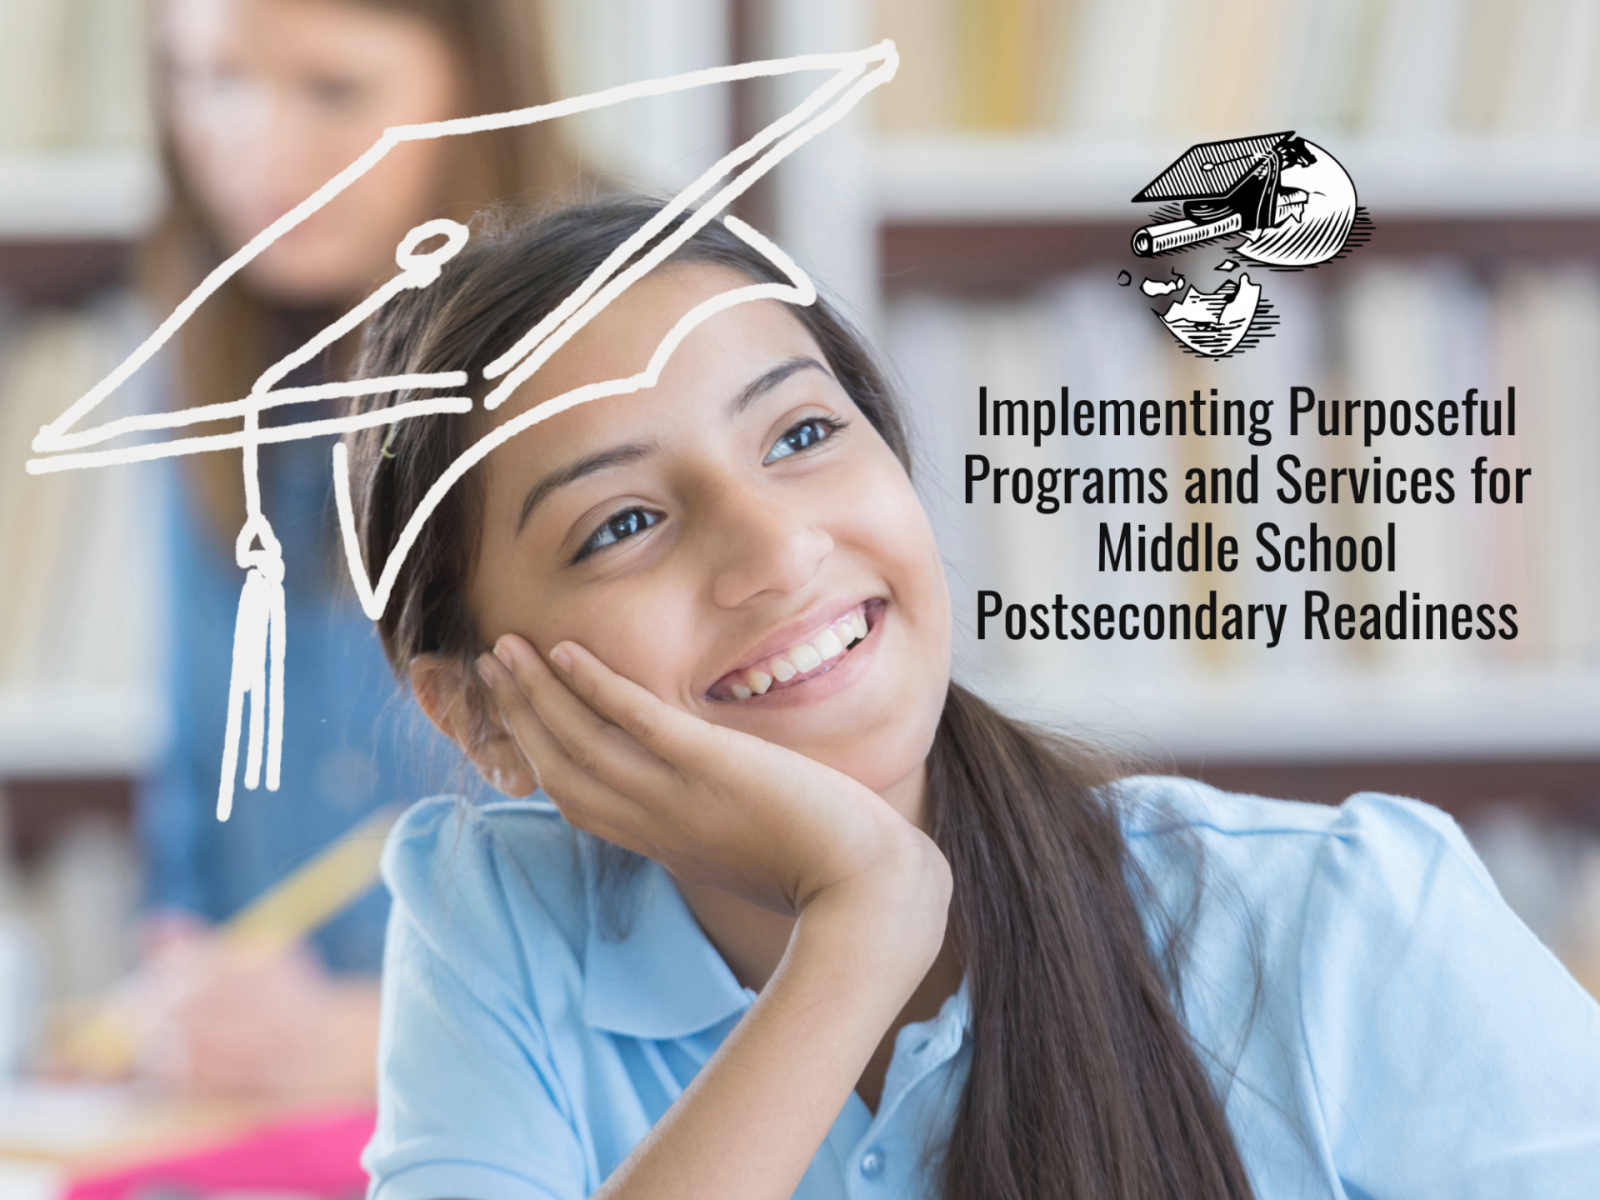 DEMO - Implementing Purposeful Programs and Services for Middle School Postsecondary Readiness